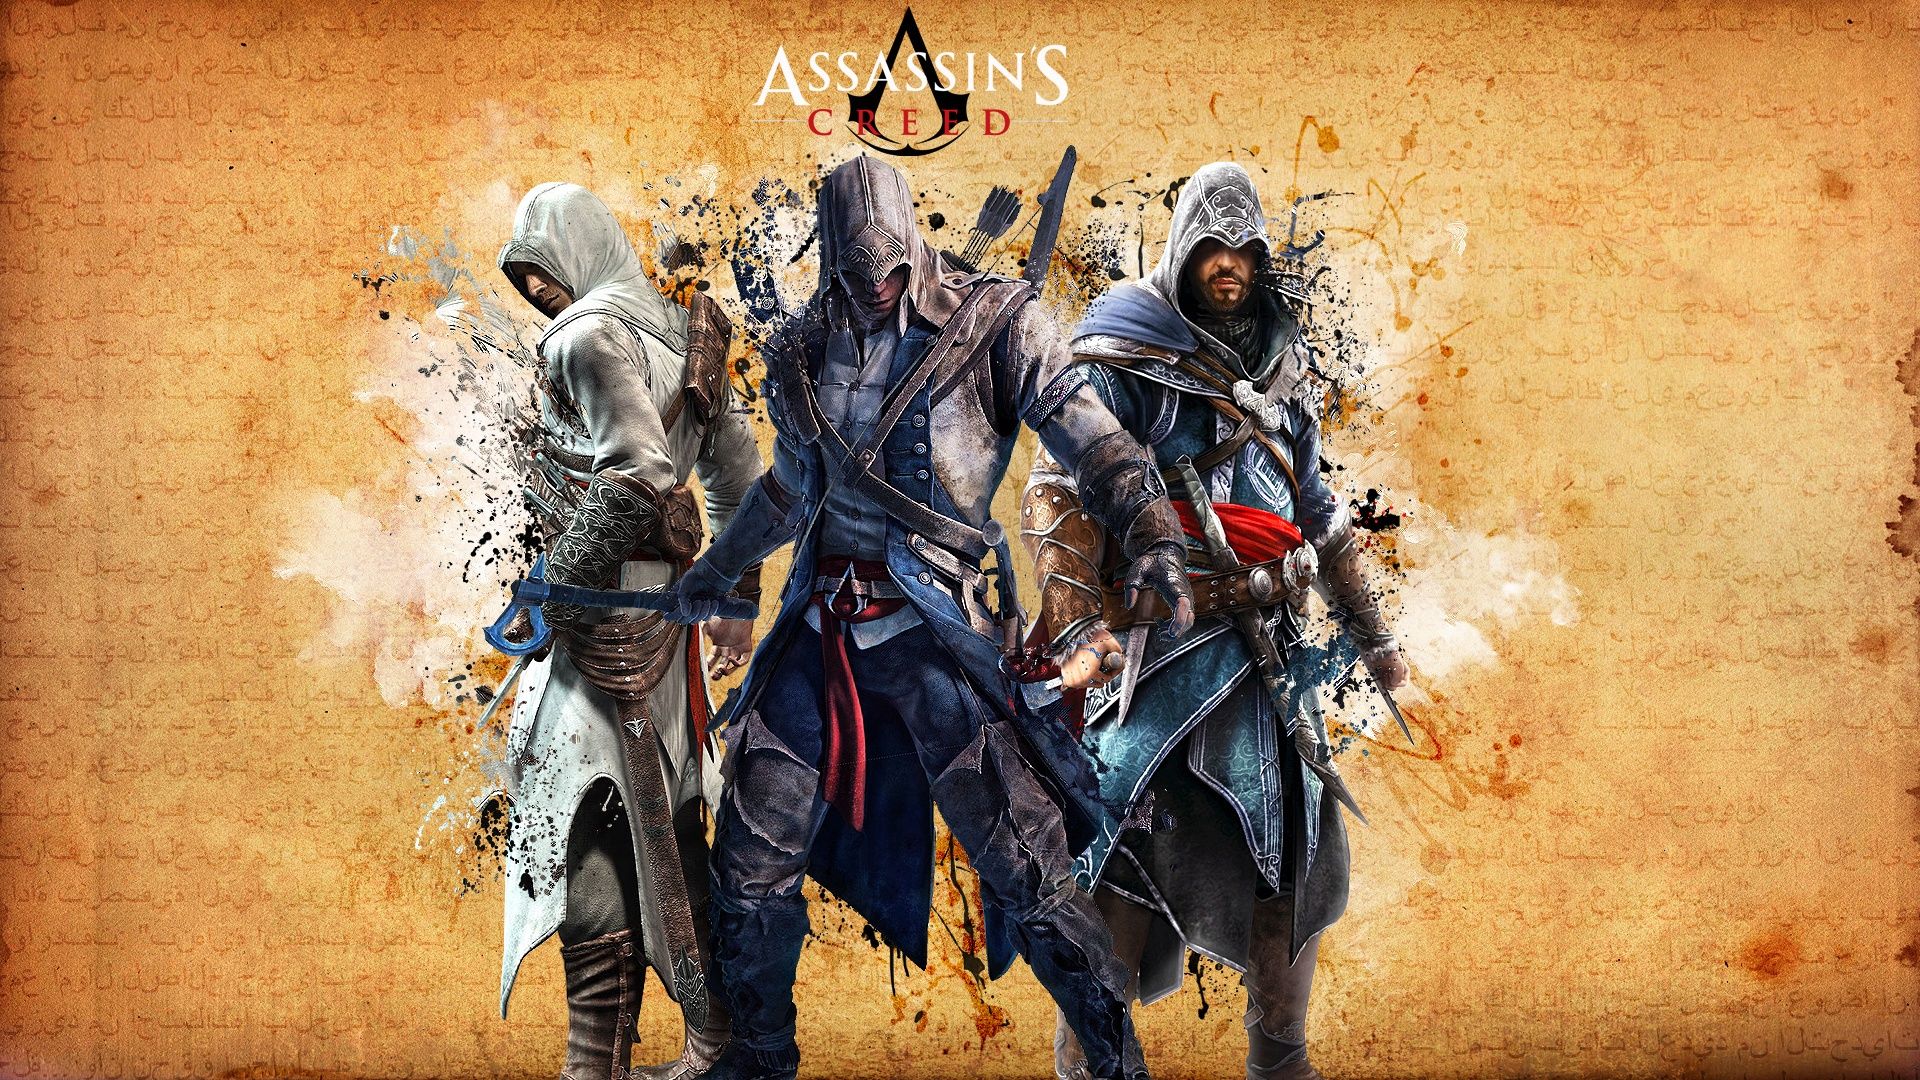 Assassins Creed HD Wallpapers and Backgrounds